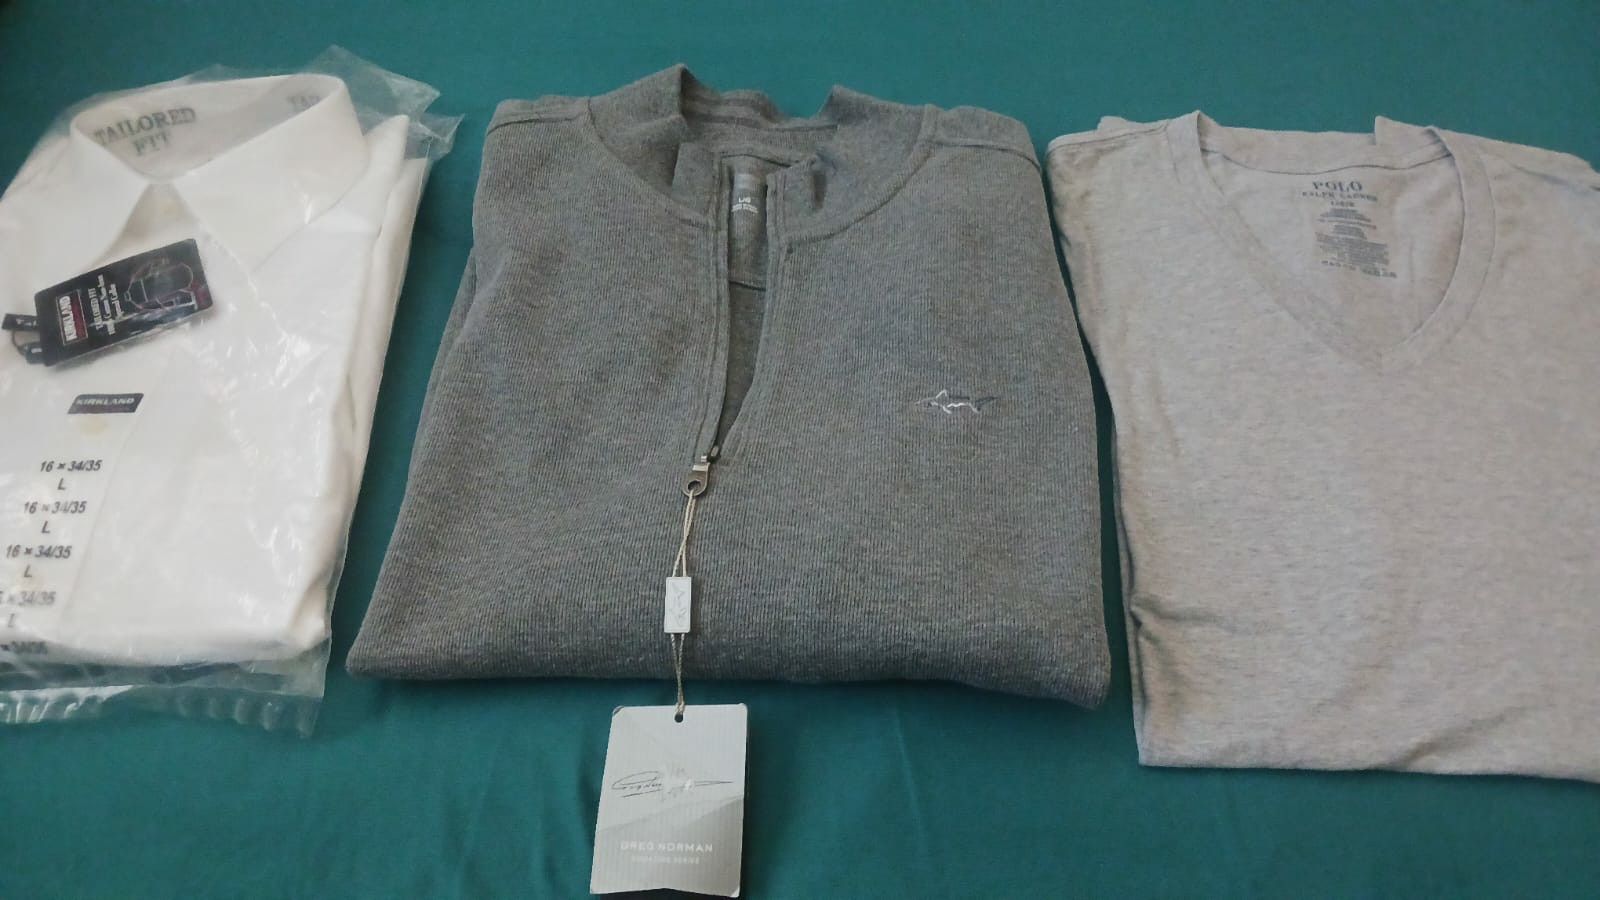 Men's Clothes all 3 For $16